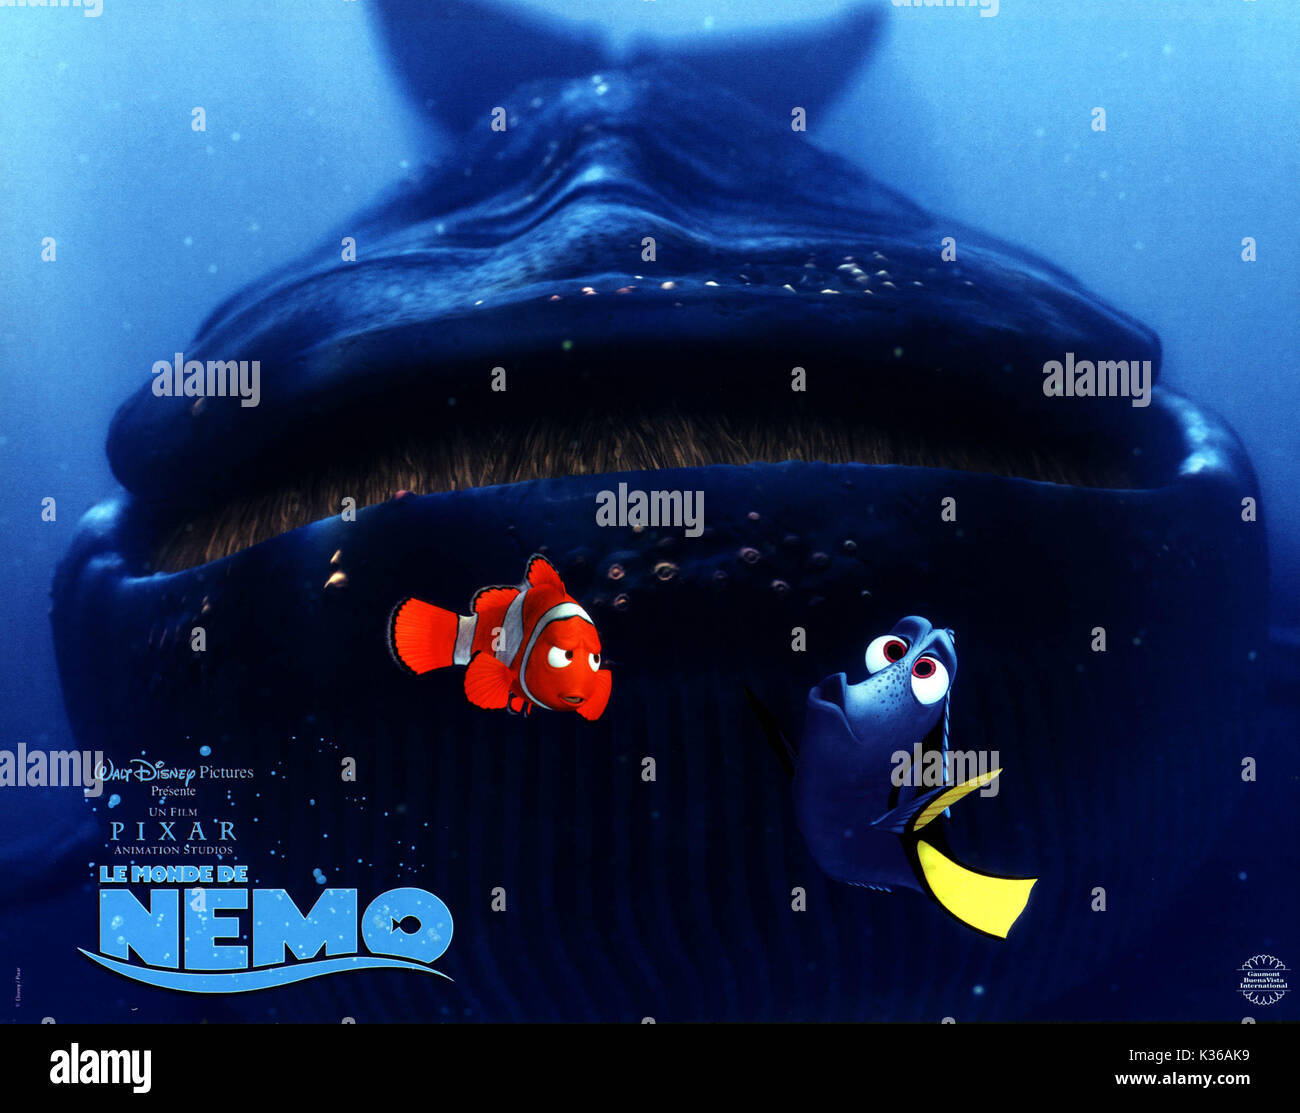 Finding Nemo The Whale